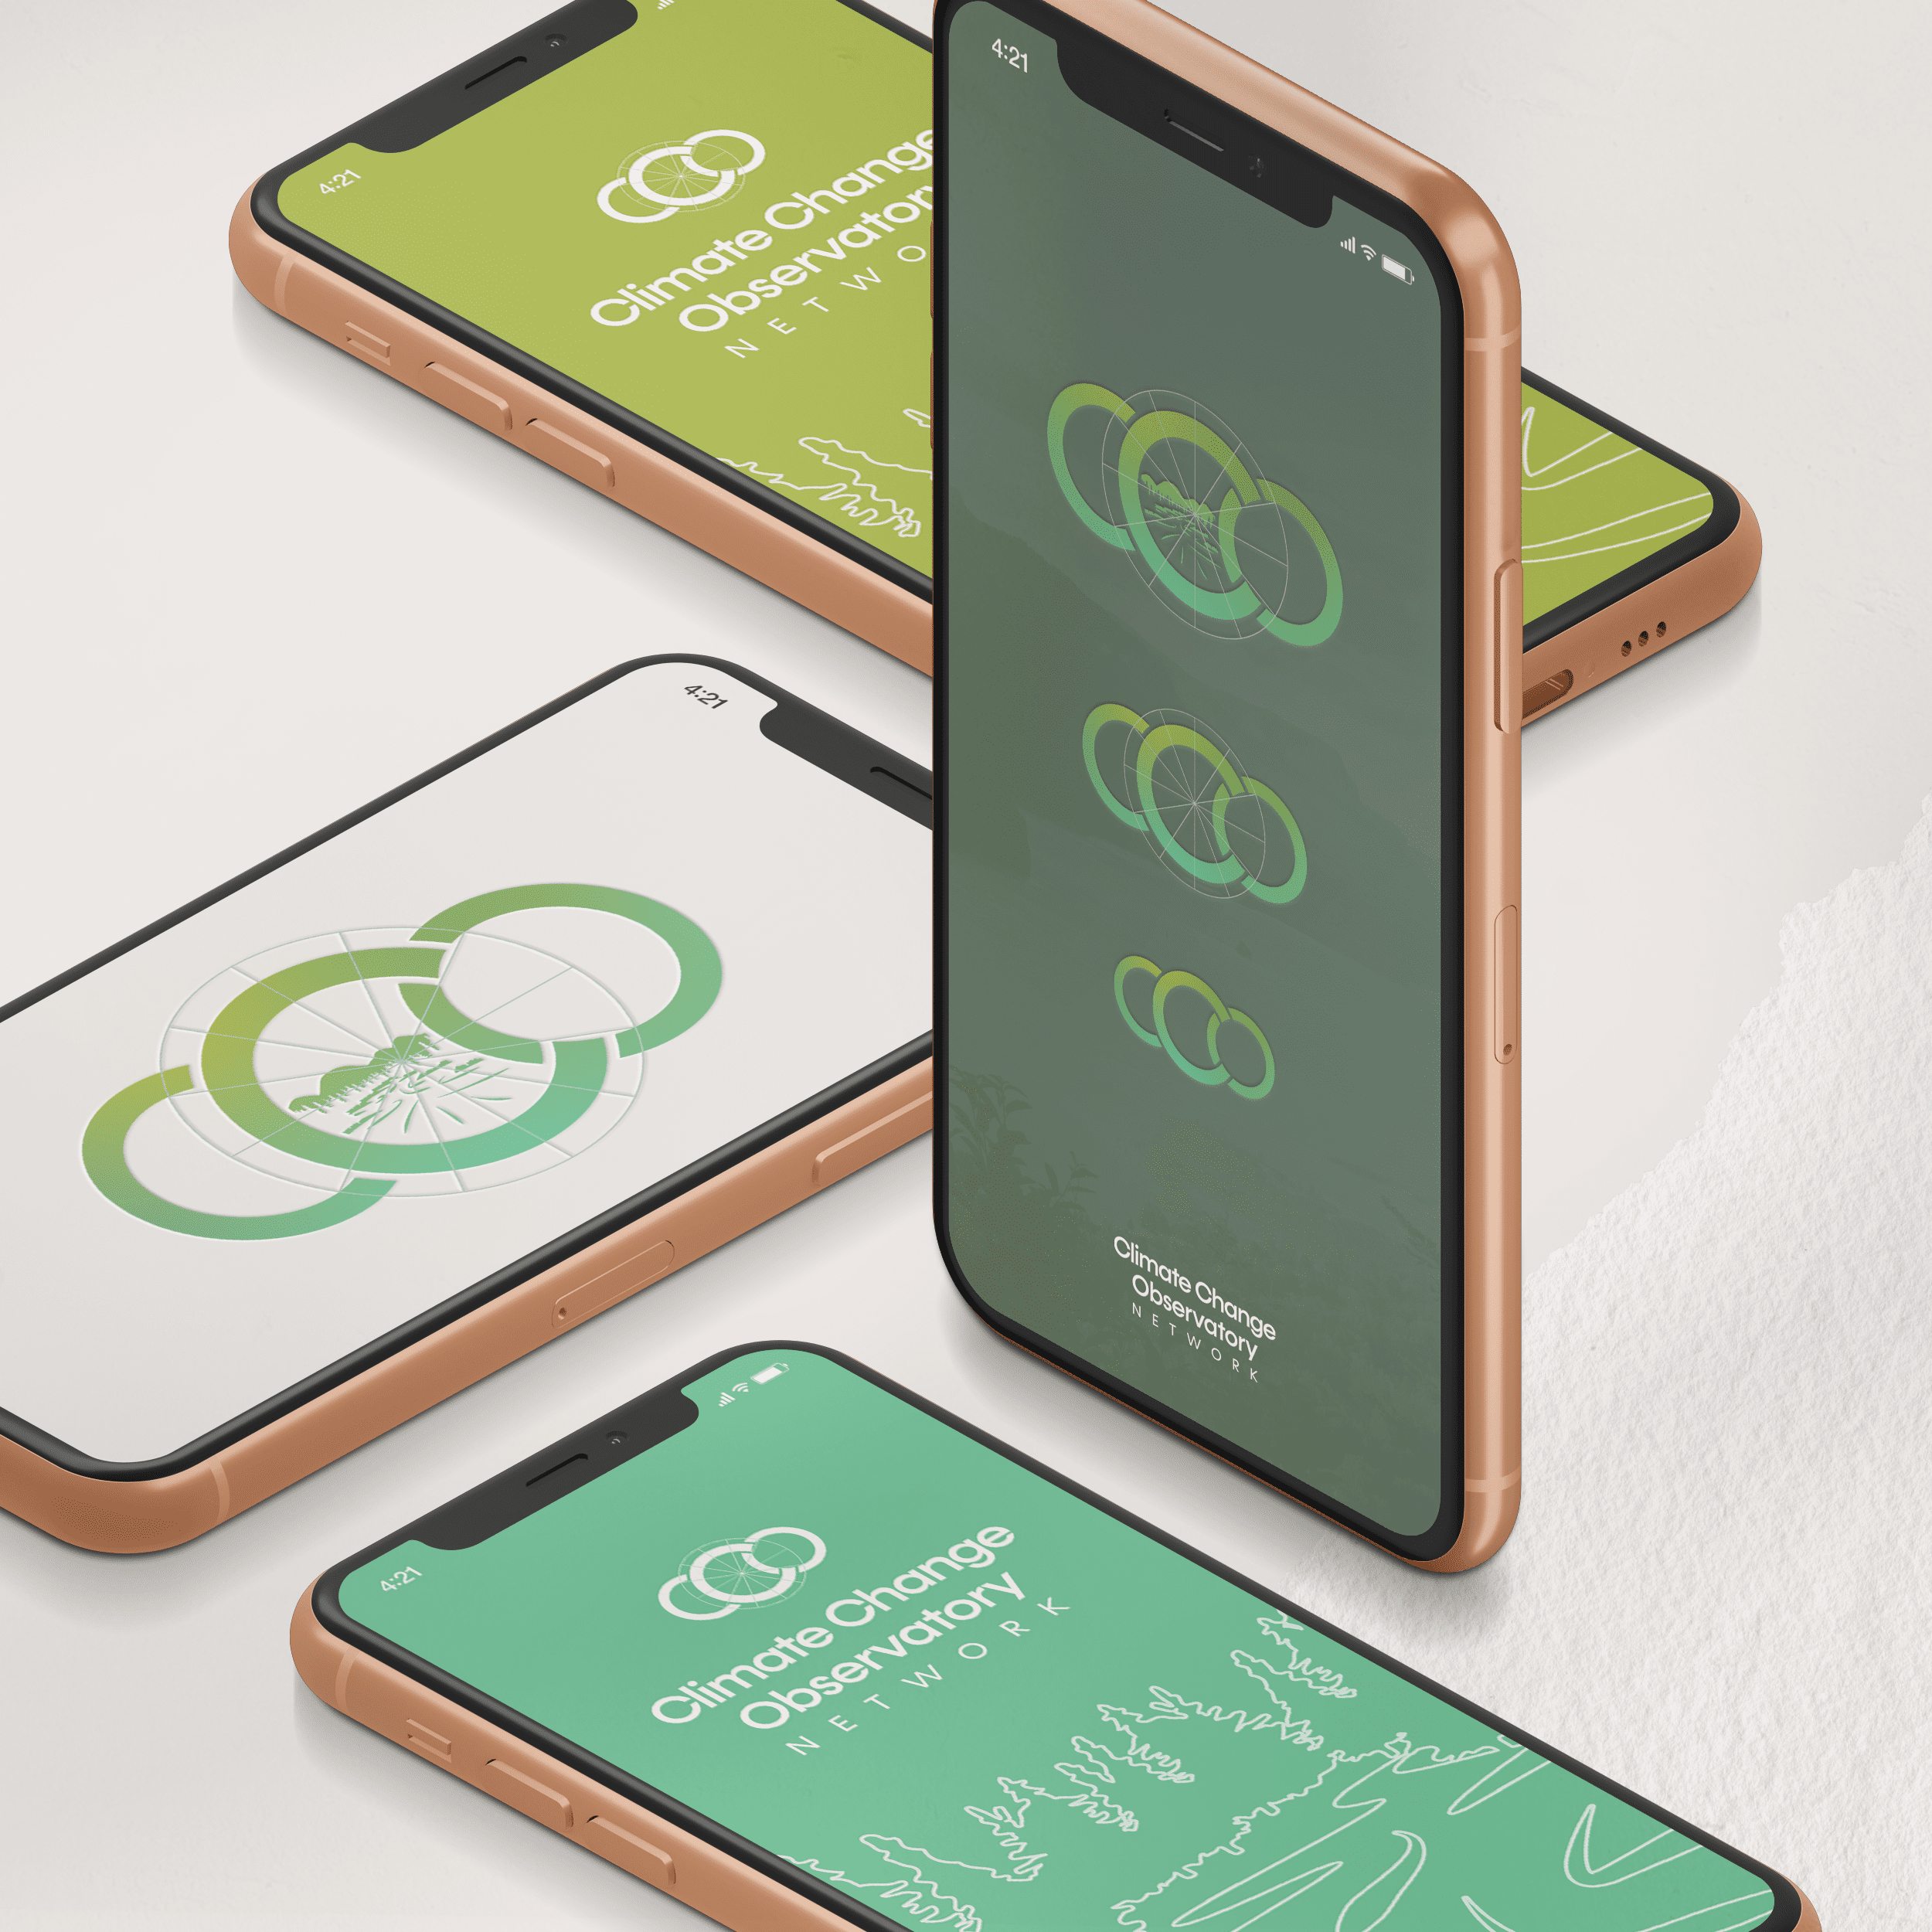 Smartphones with several wallpapers of CCO brand identity